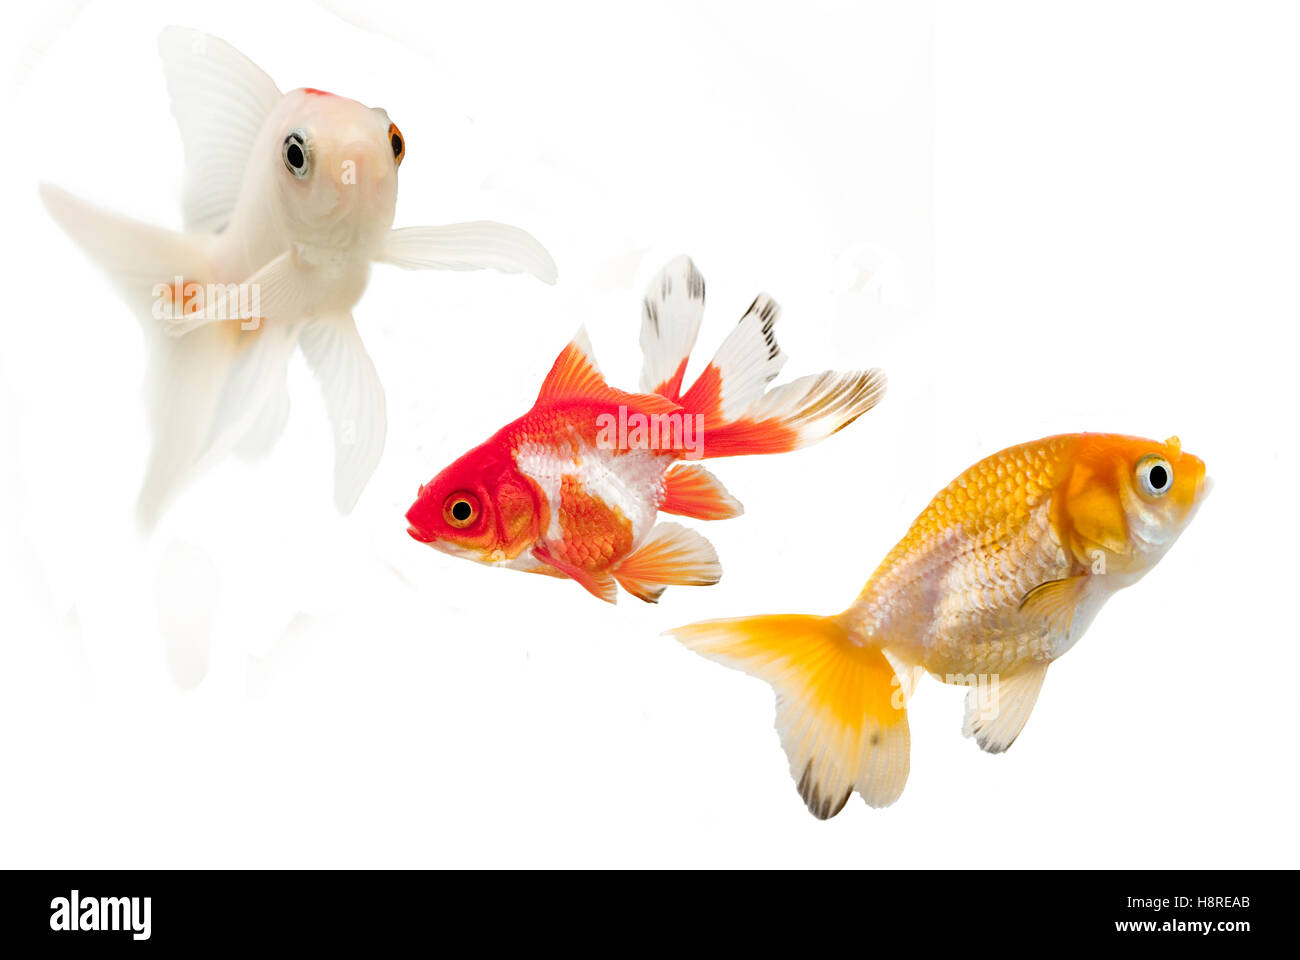 Goldfish breeds,comet,fantail and ranchu. Isolated on a white background. Stock Photo